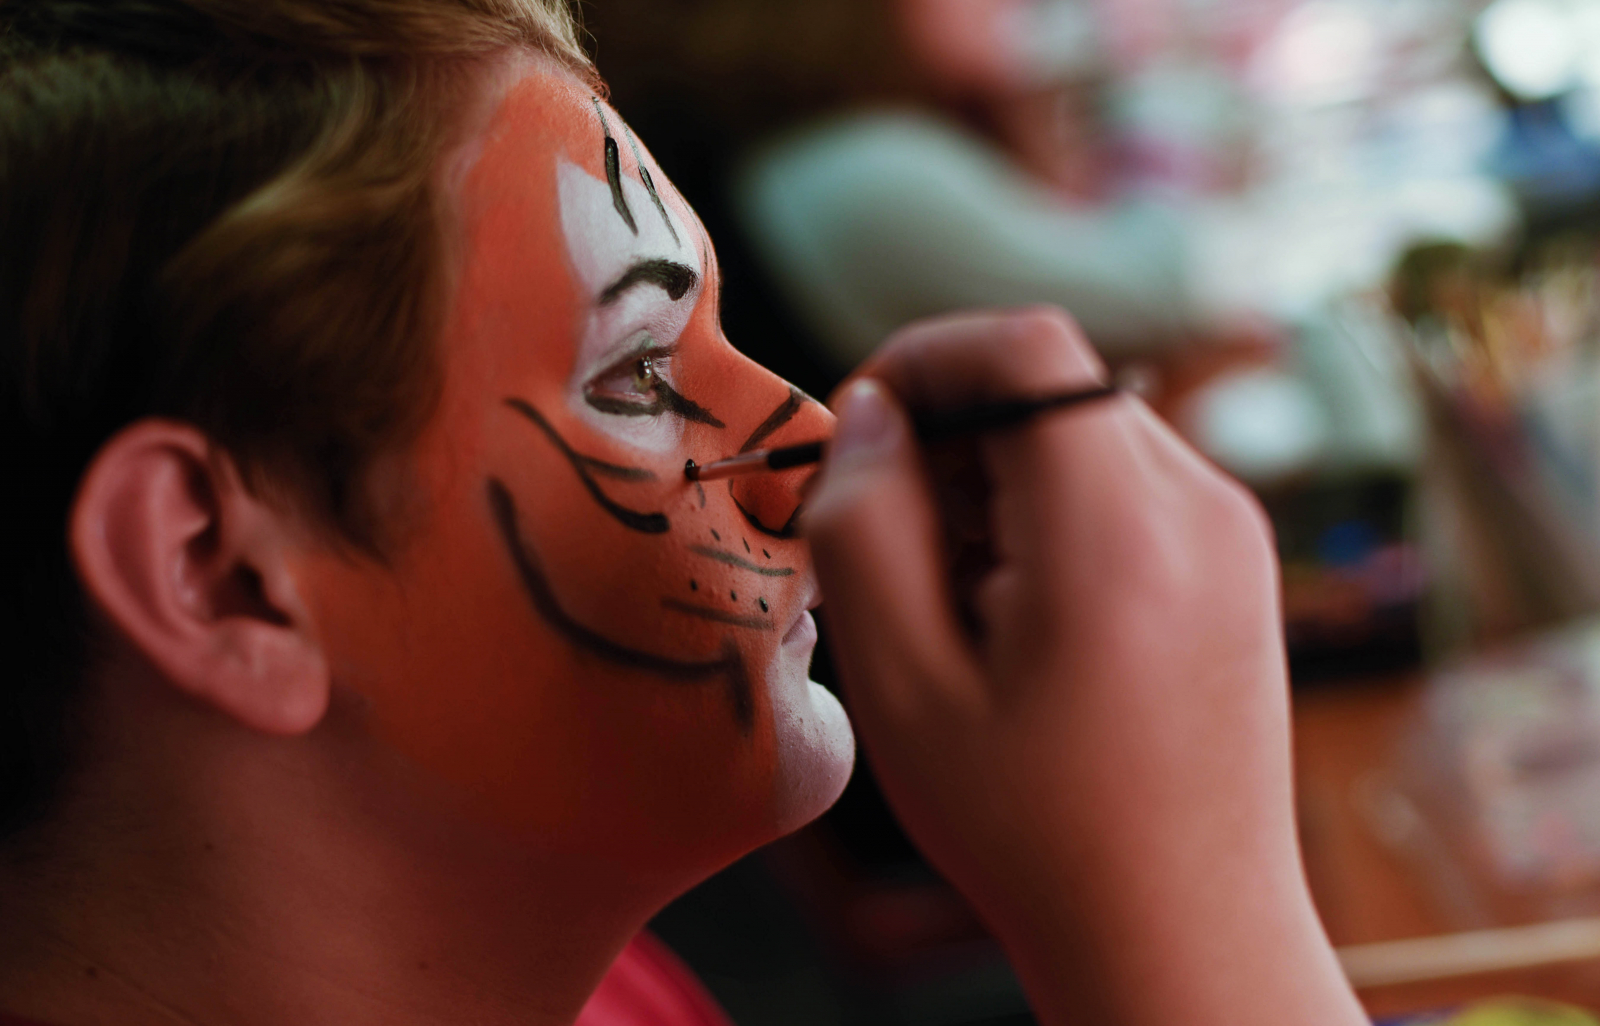 Students paint their faces in Stage and Special FX Makeup camp at Proctors Wednesday, July 19, 2017.